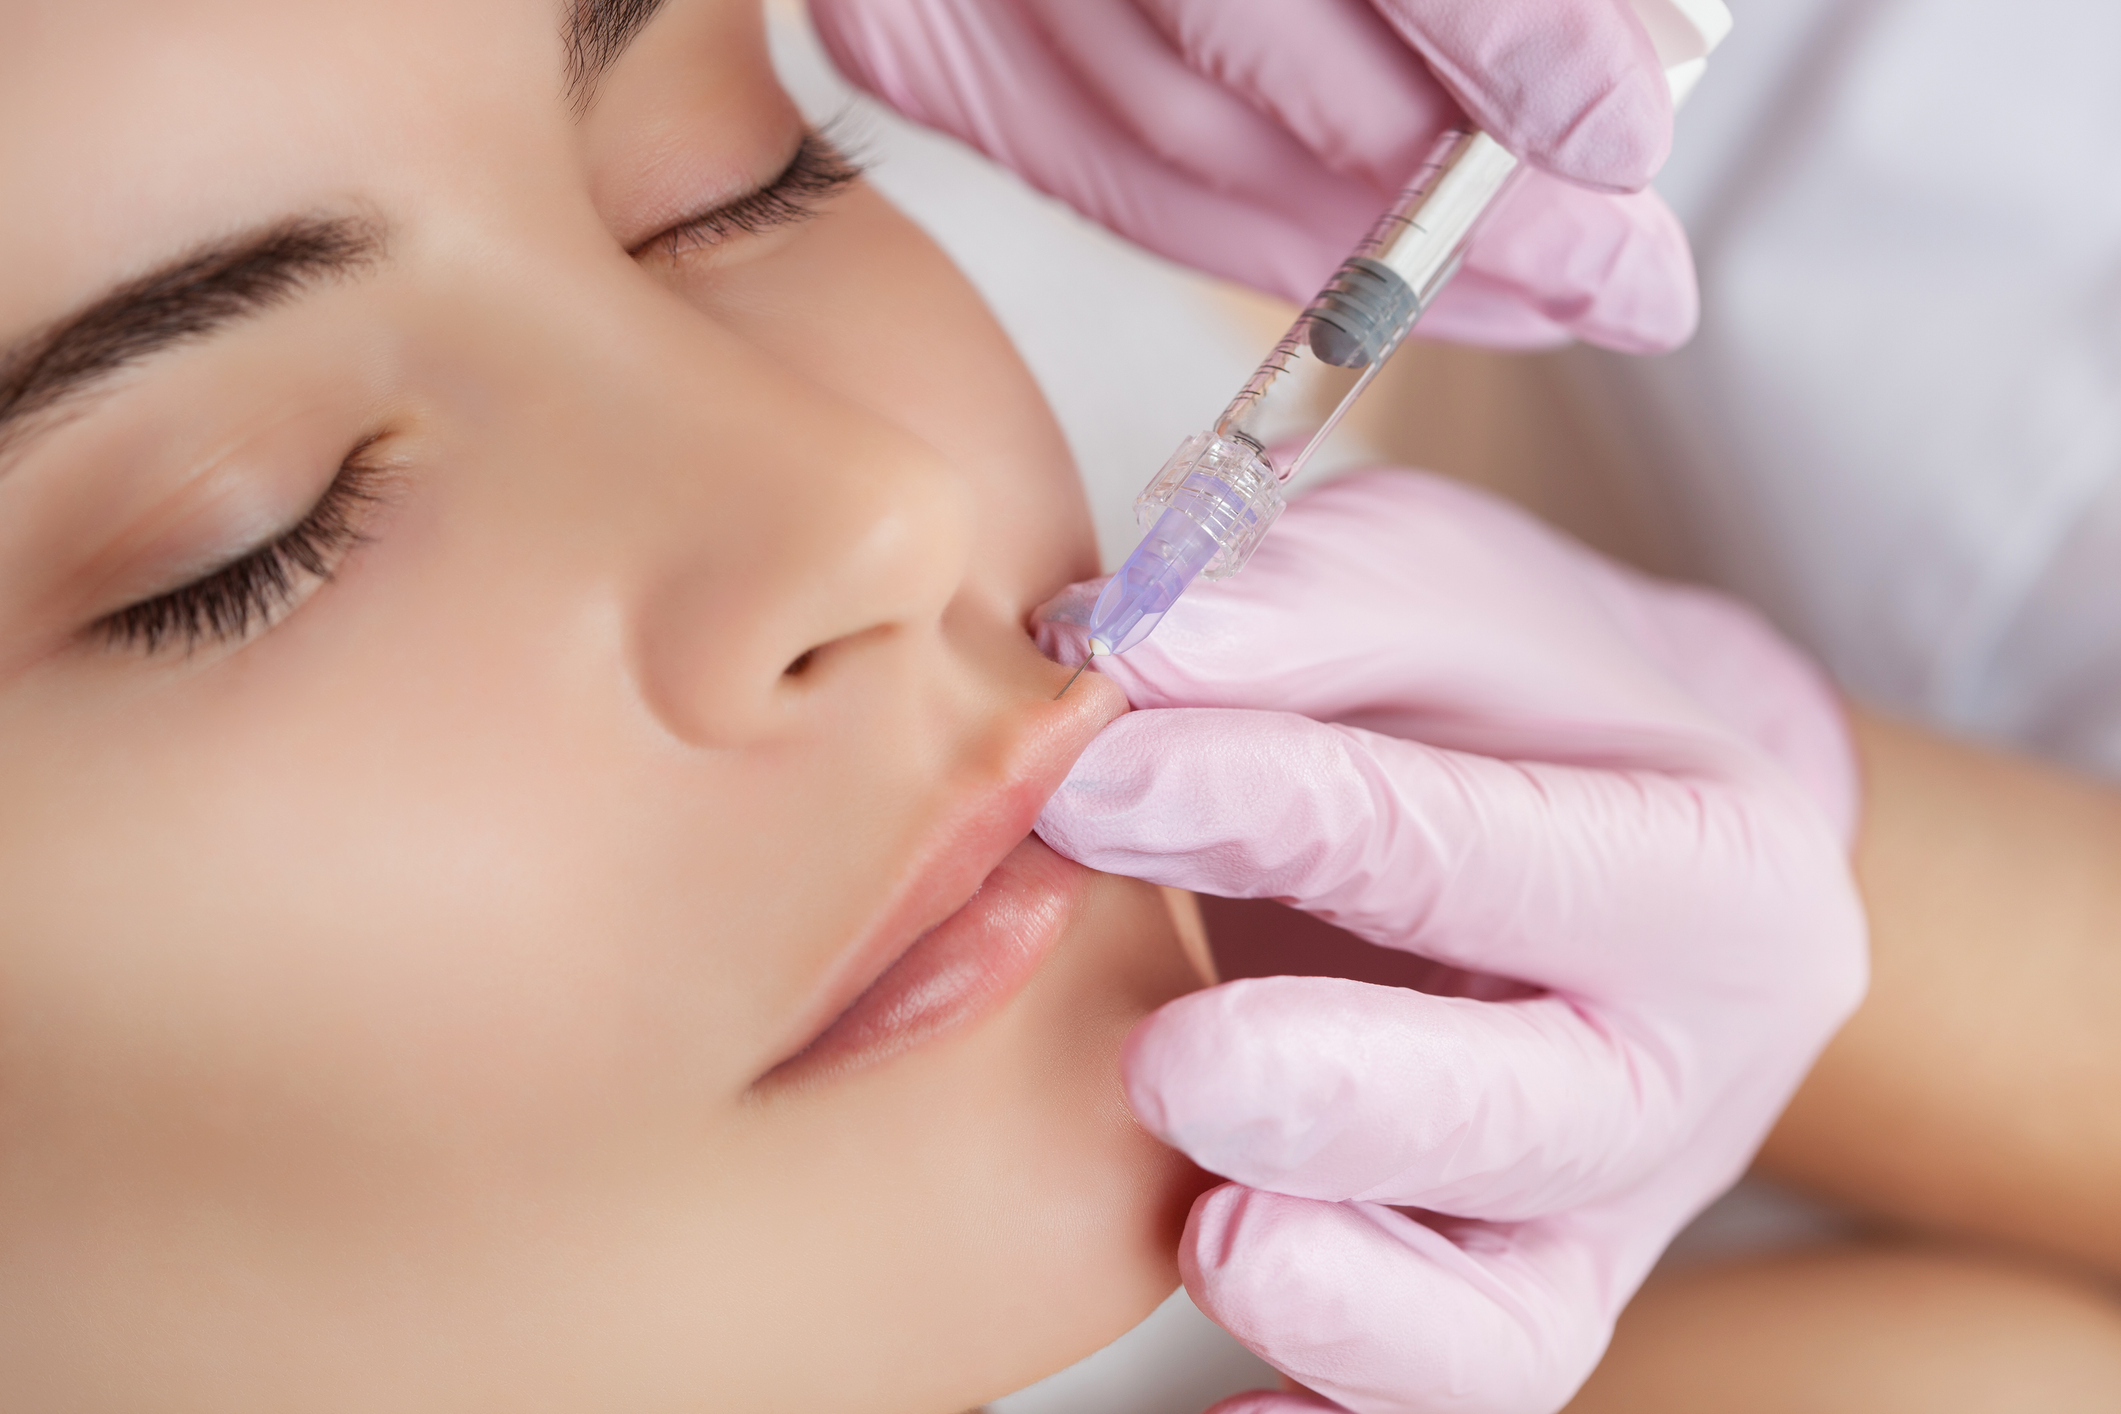 Stock image of a woman receiving a cosmetic injectable treatment